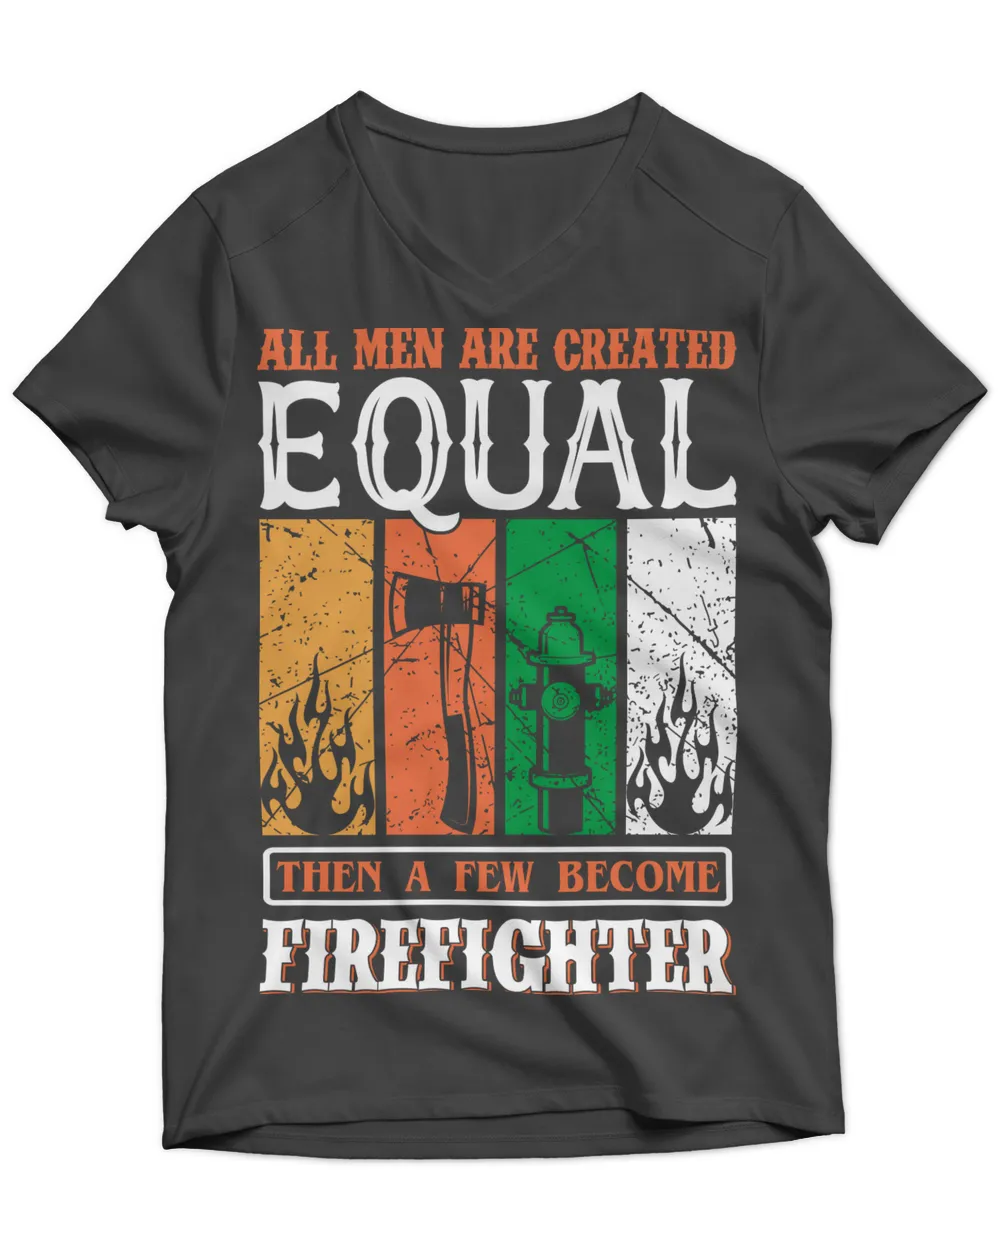 Firefighter T Shirt, Firefighter Hoodie, Firefighter Long Sleeved T-Shirt, V-Neck, Firefighter Shirts Funny Quotes (11)